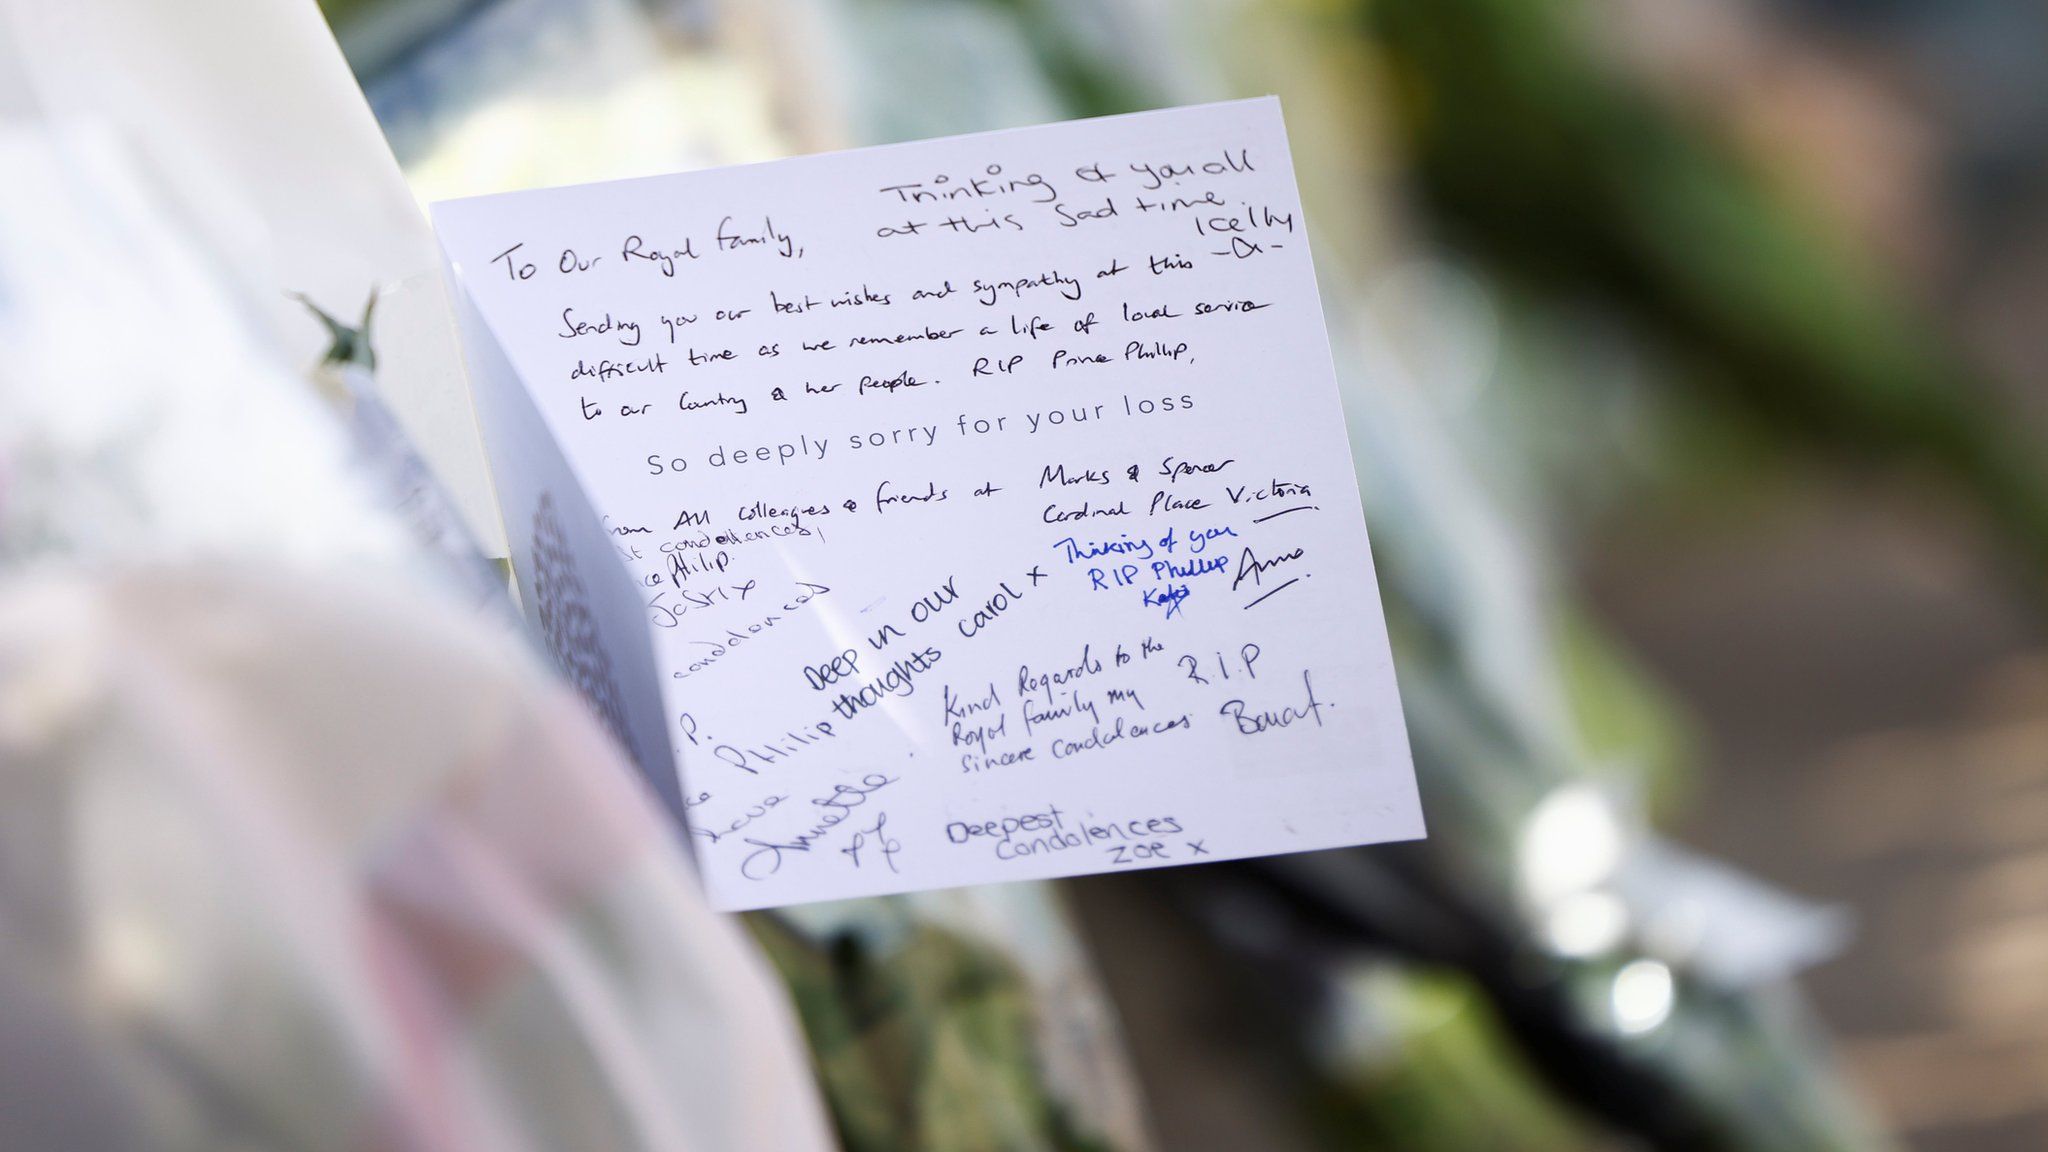 A sympathy card attached to flowers outside Buckingham Palace on 9 April 2021